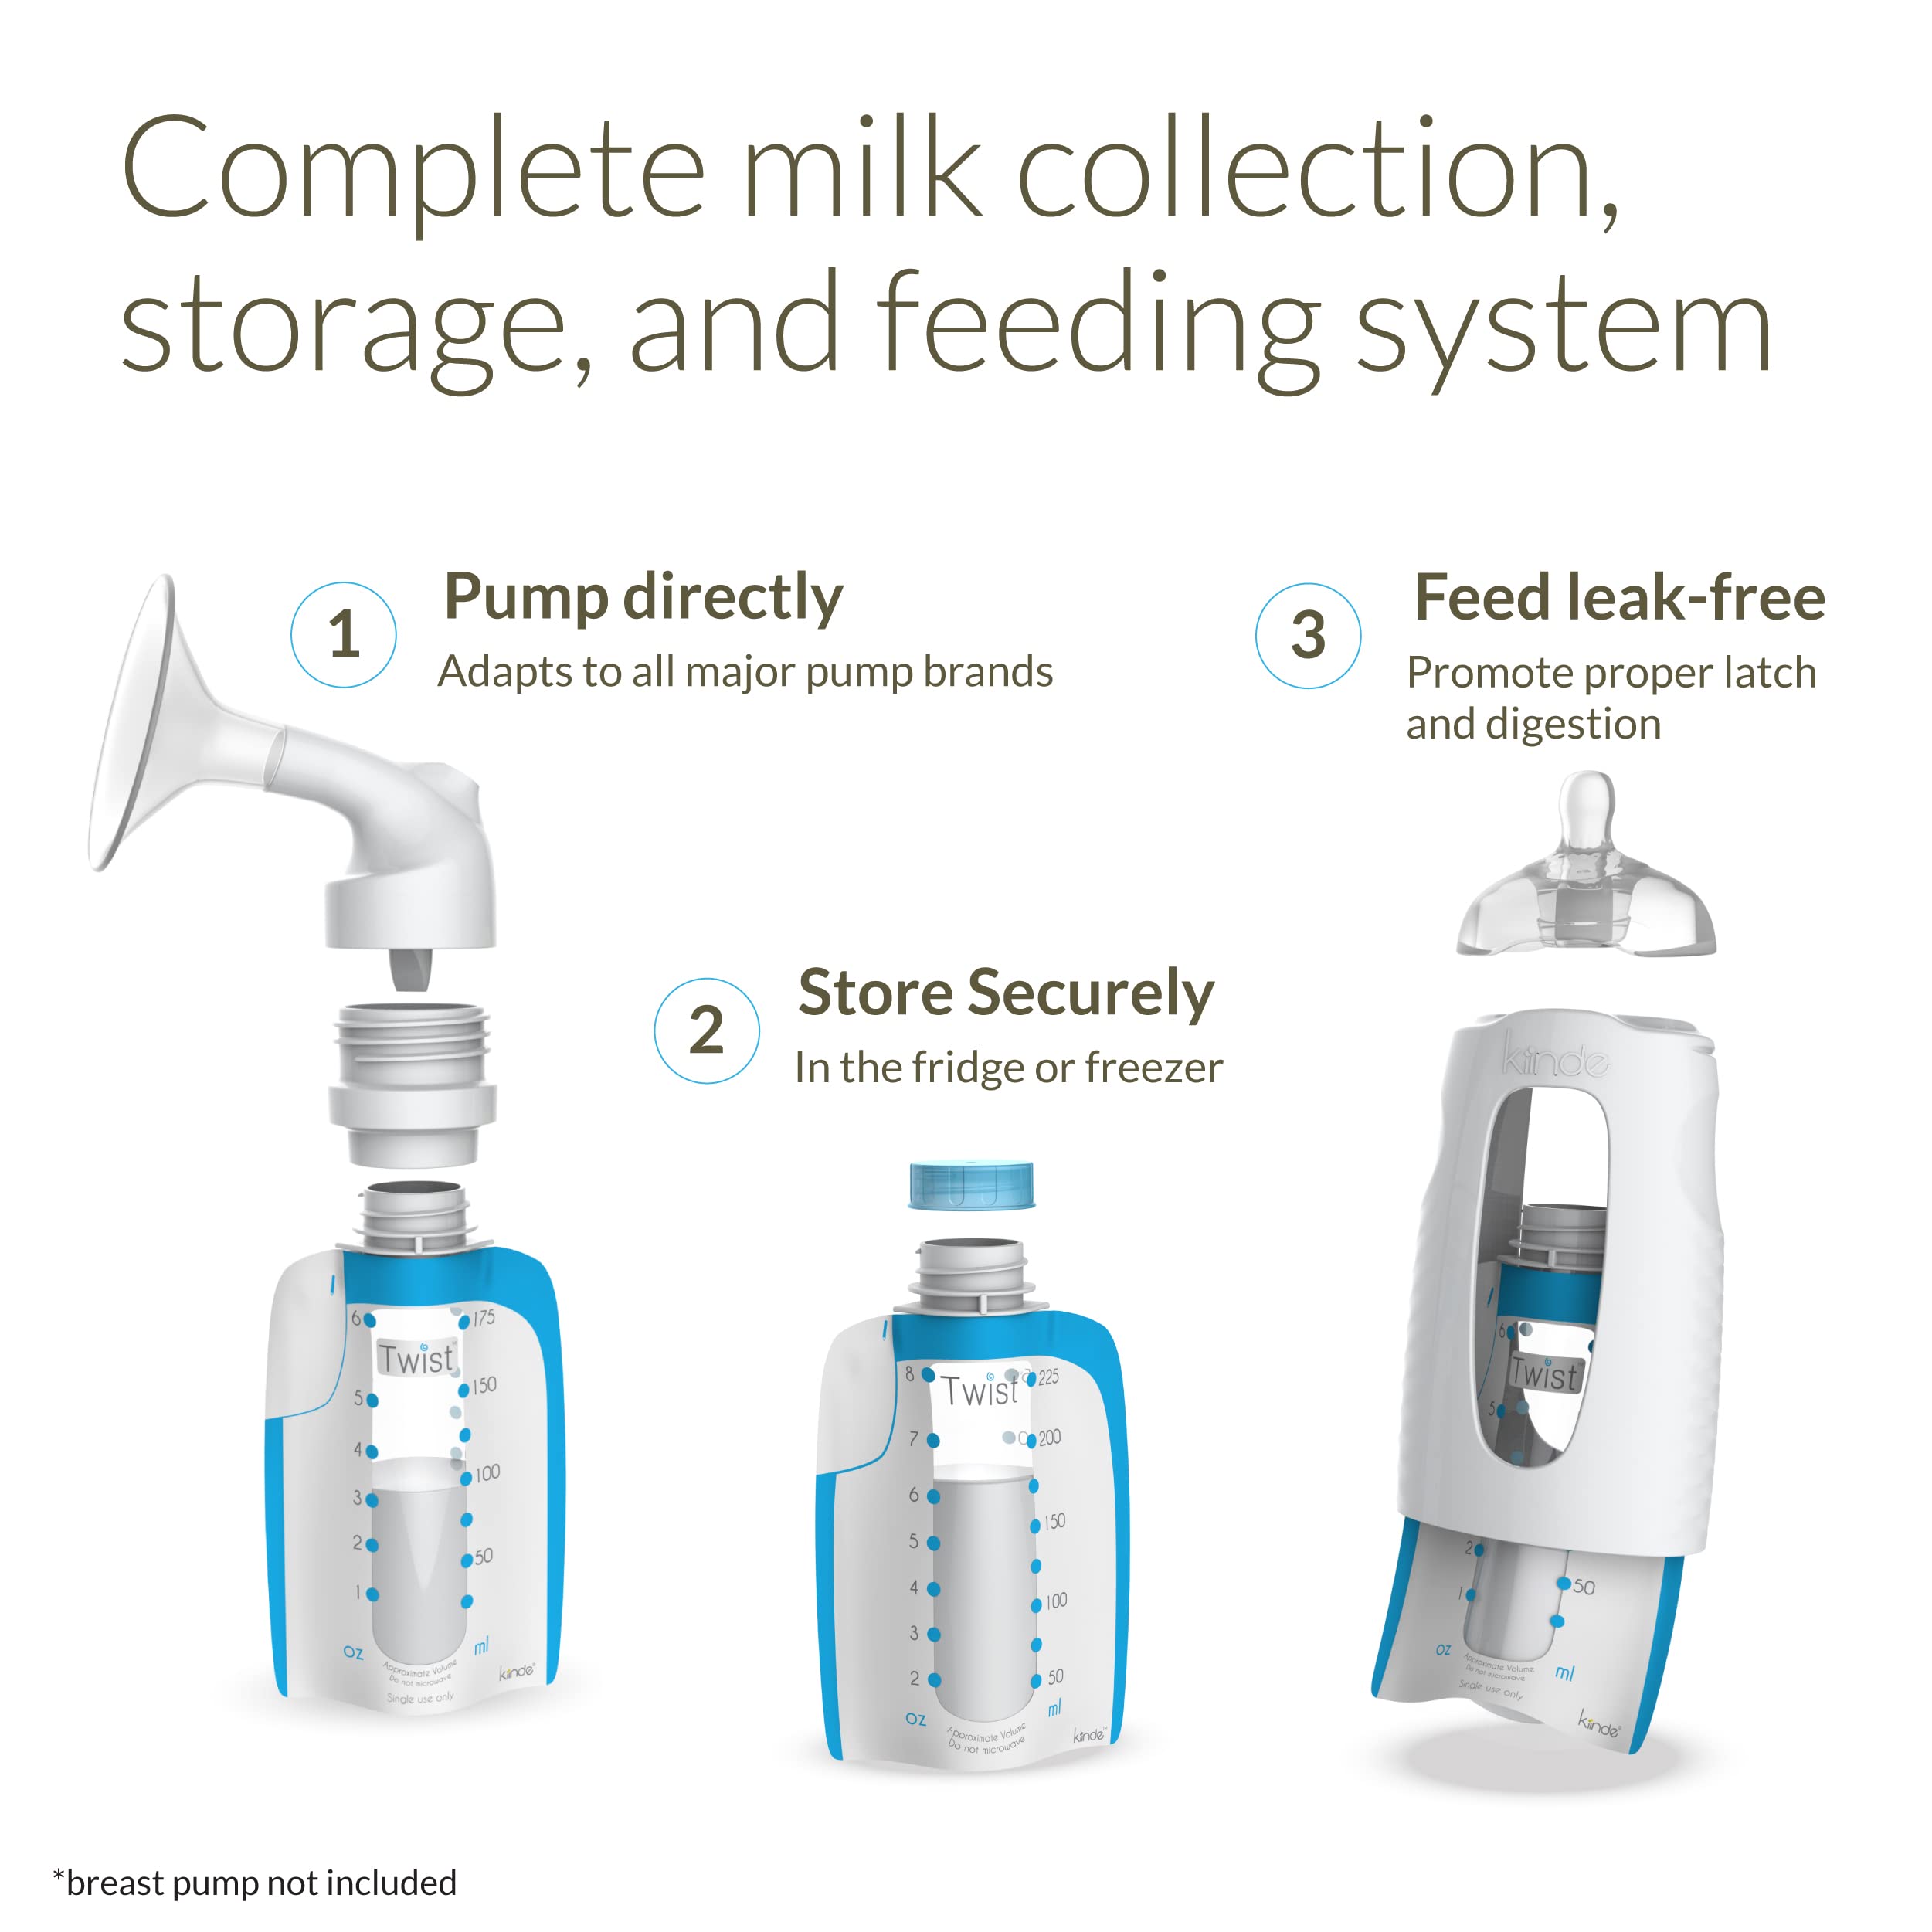 Kiinde Twist Universal Direct-Pump Feeding System and Warmer Gift Set & Twist Pouch Direct-Pump Direct-Feed Twist Cap Breast Milk Storage Bags for Pumping, Freezing